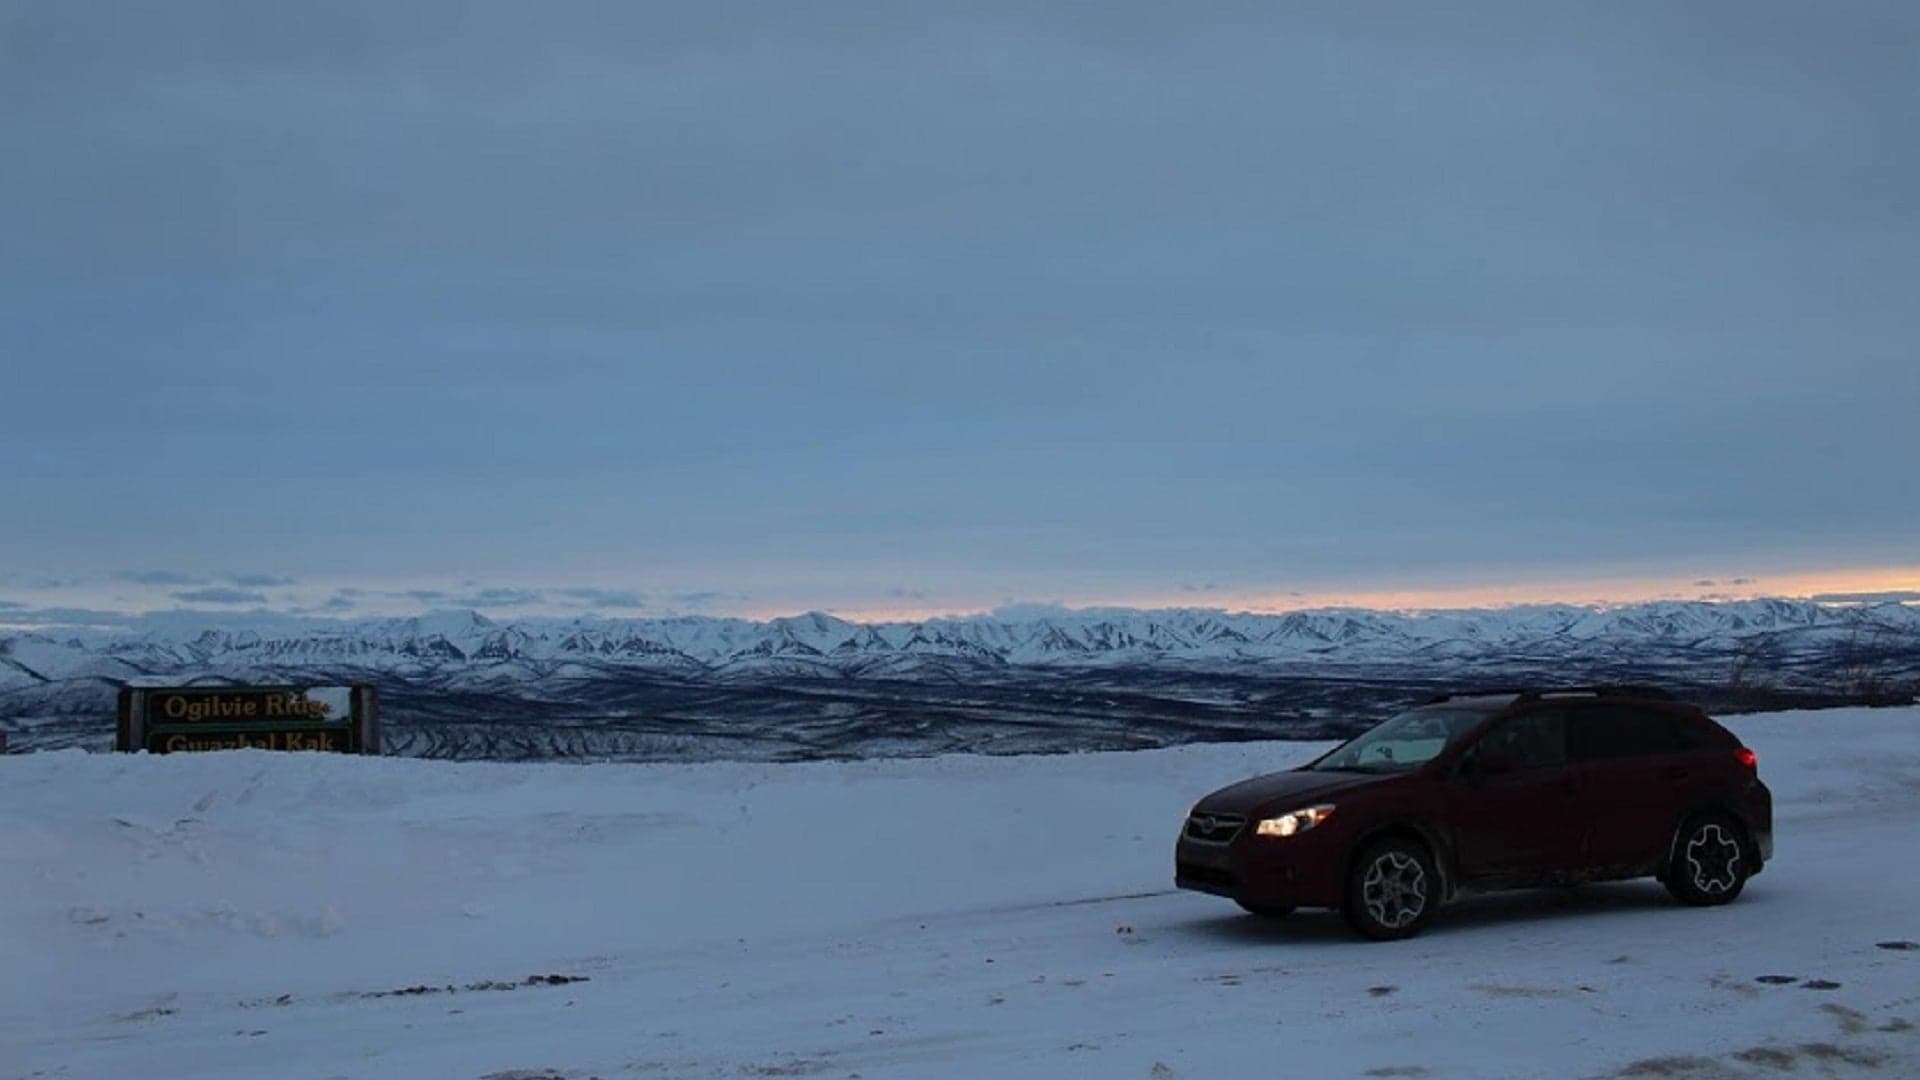 This Man Drives a Modified Subaru in the Arctic to Make Amateur Radio Contact